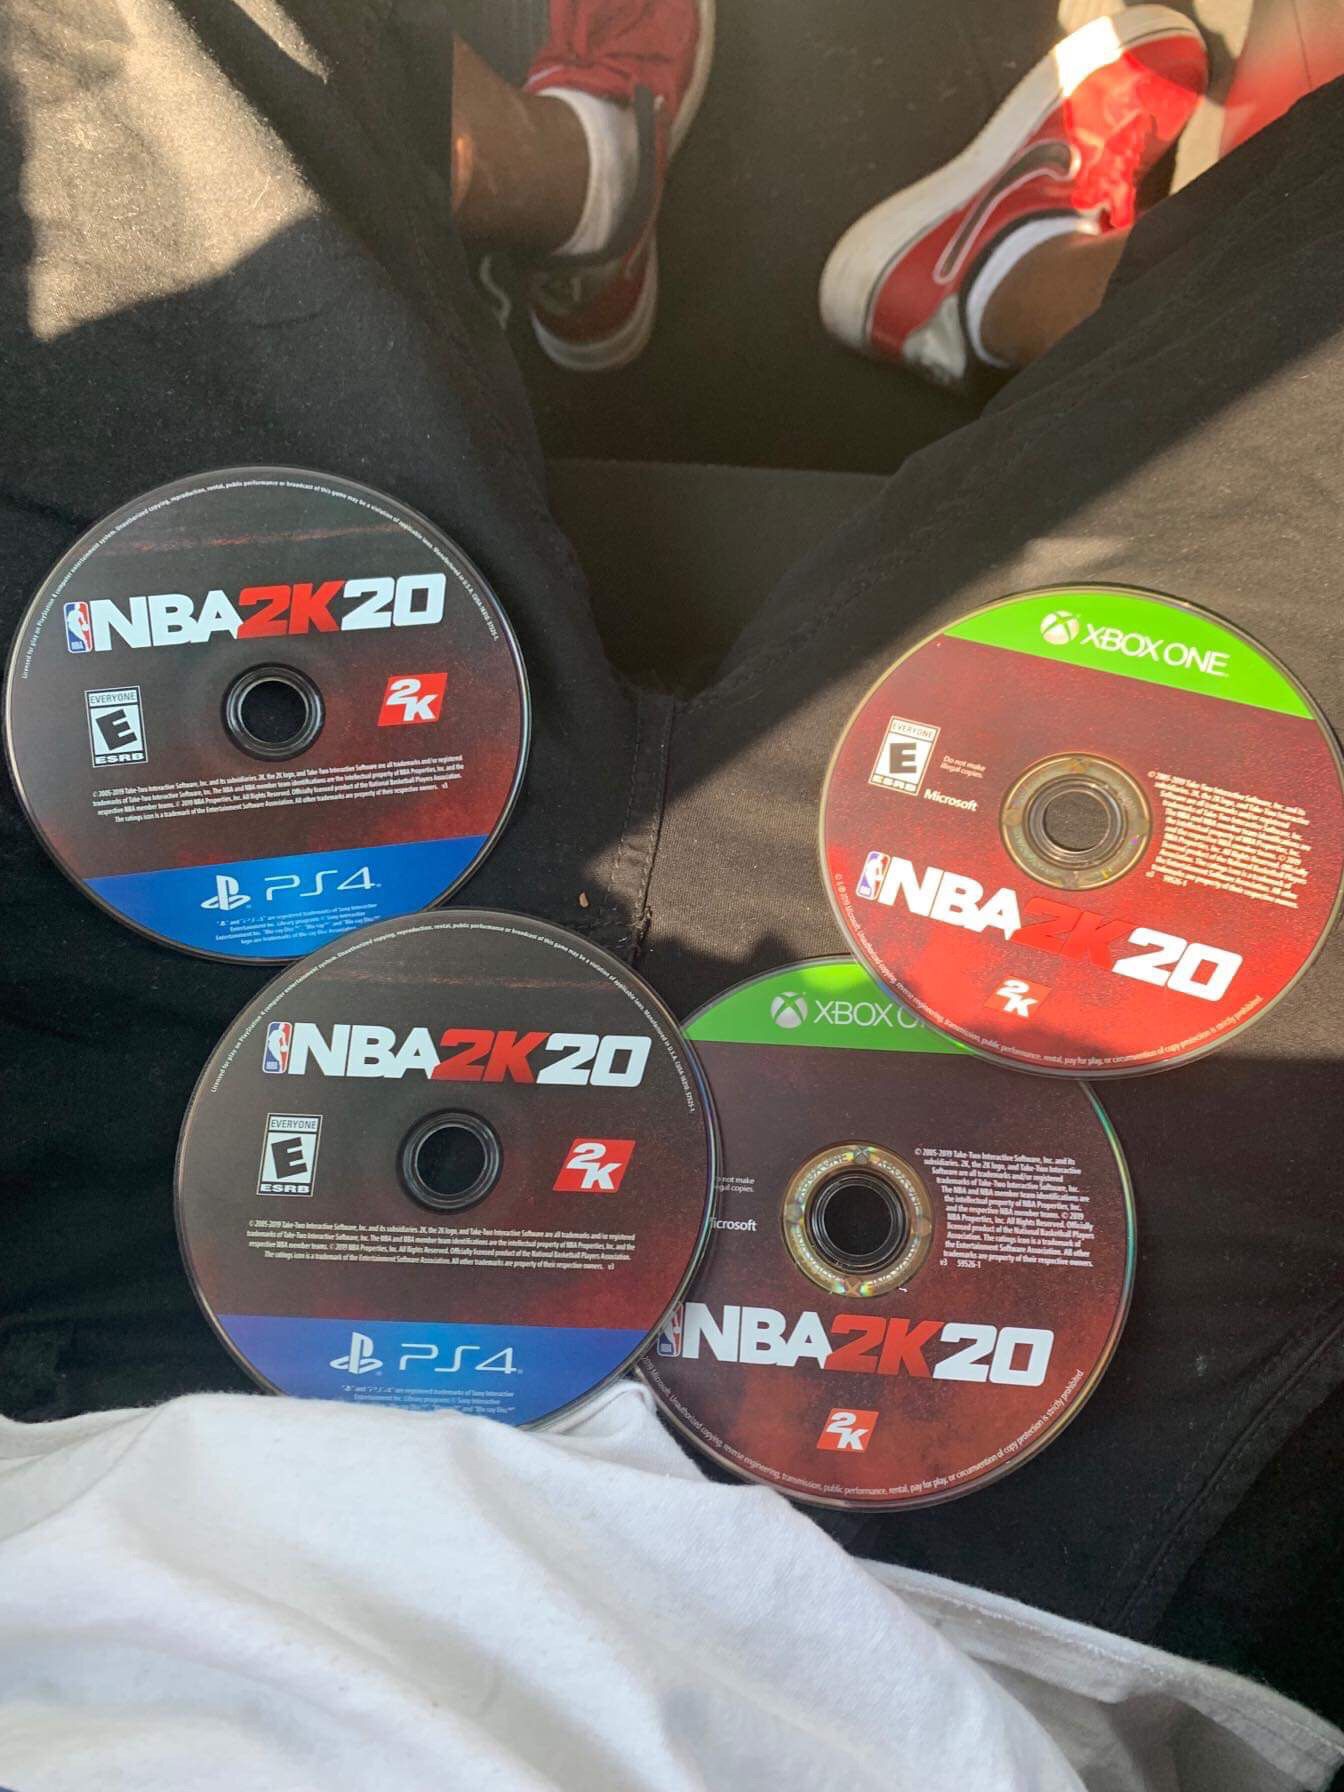 2k20 for PS4 and Xbox one